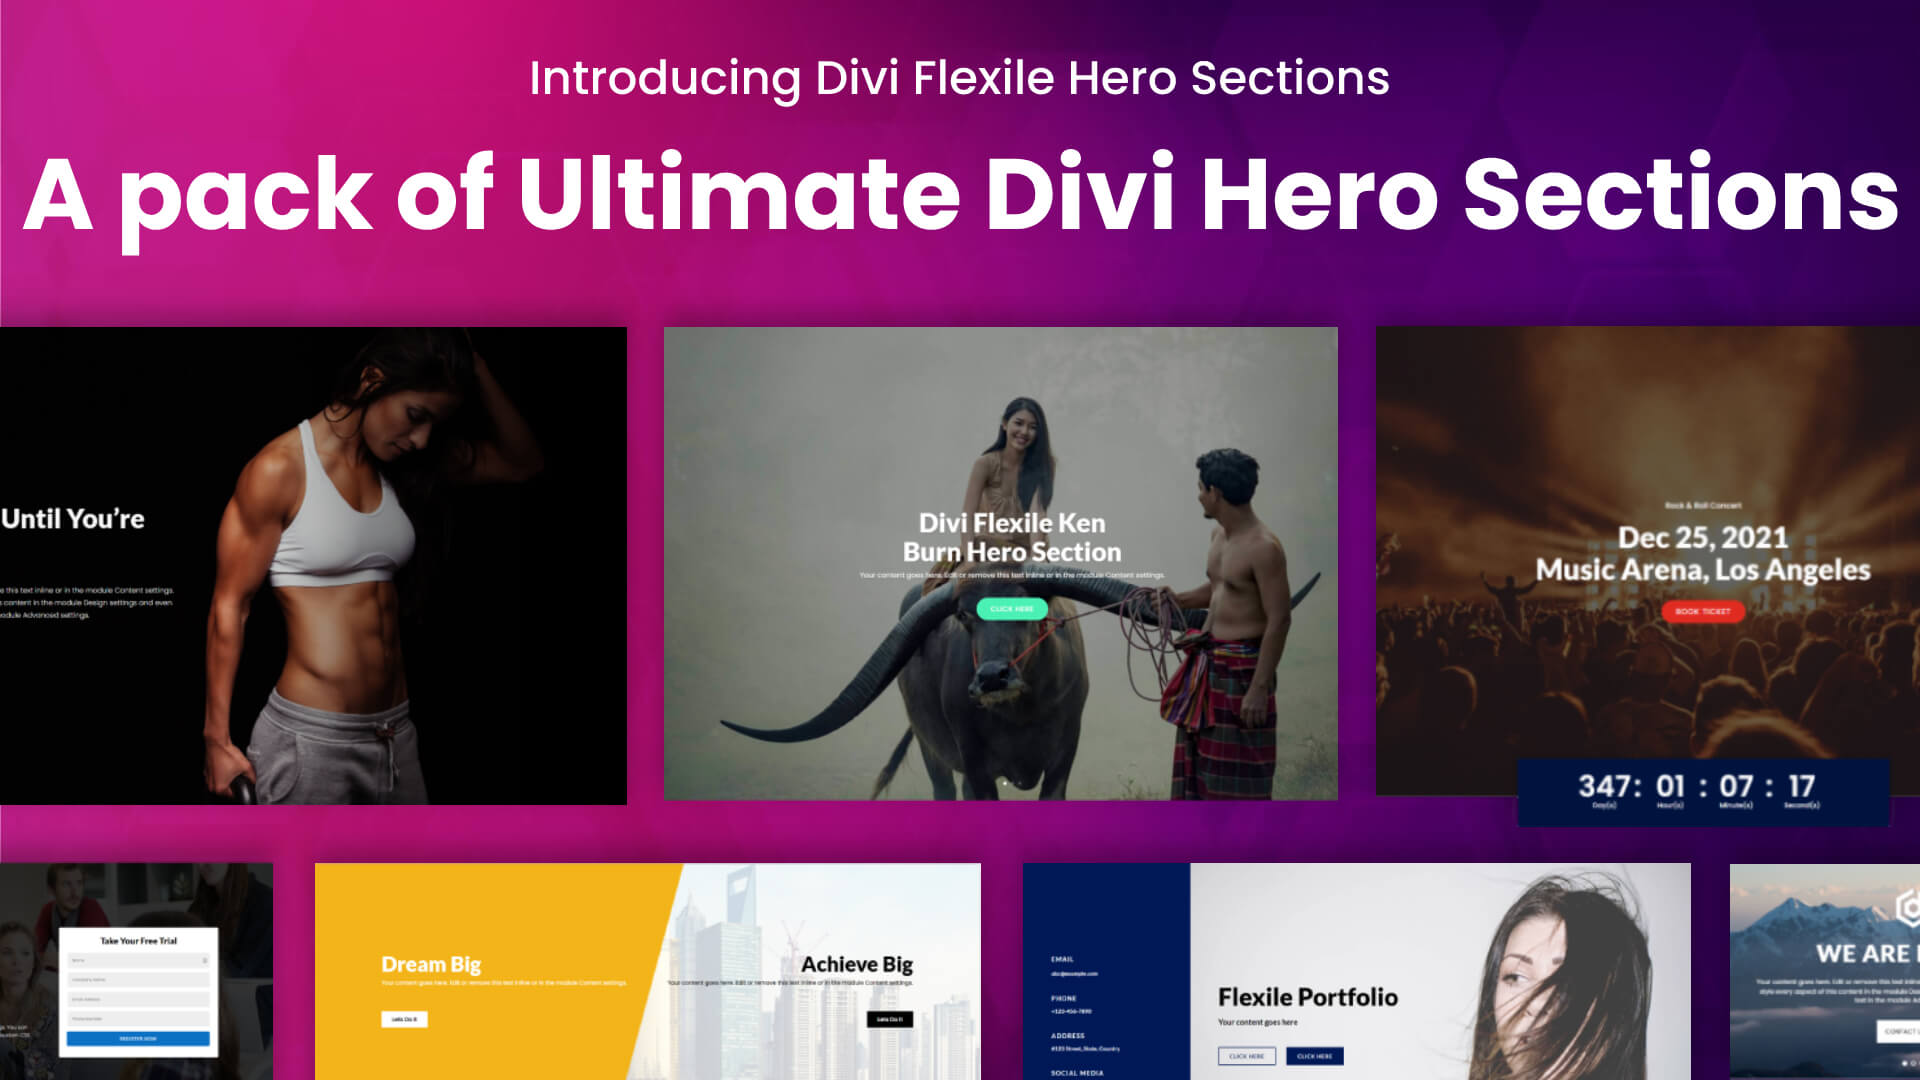 Divi Flexile Hero Sections introductory blog post